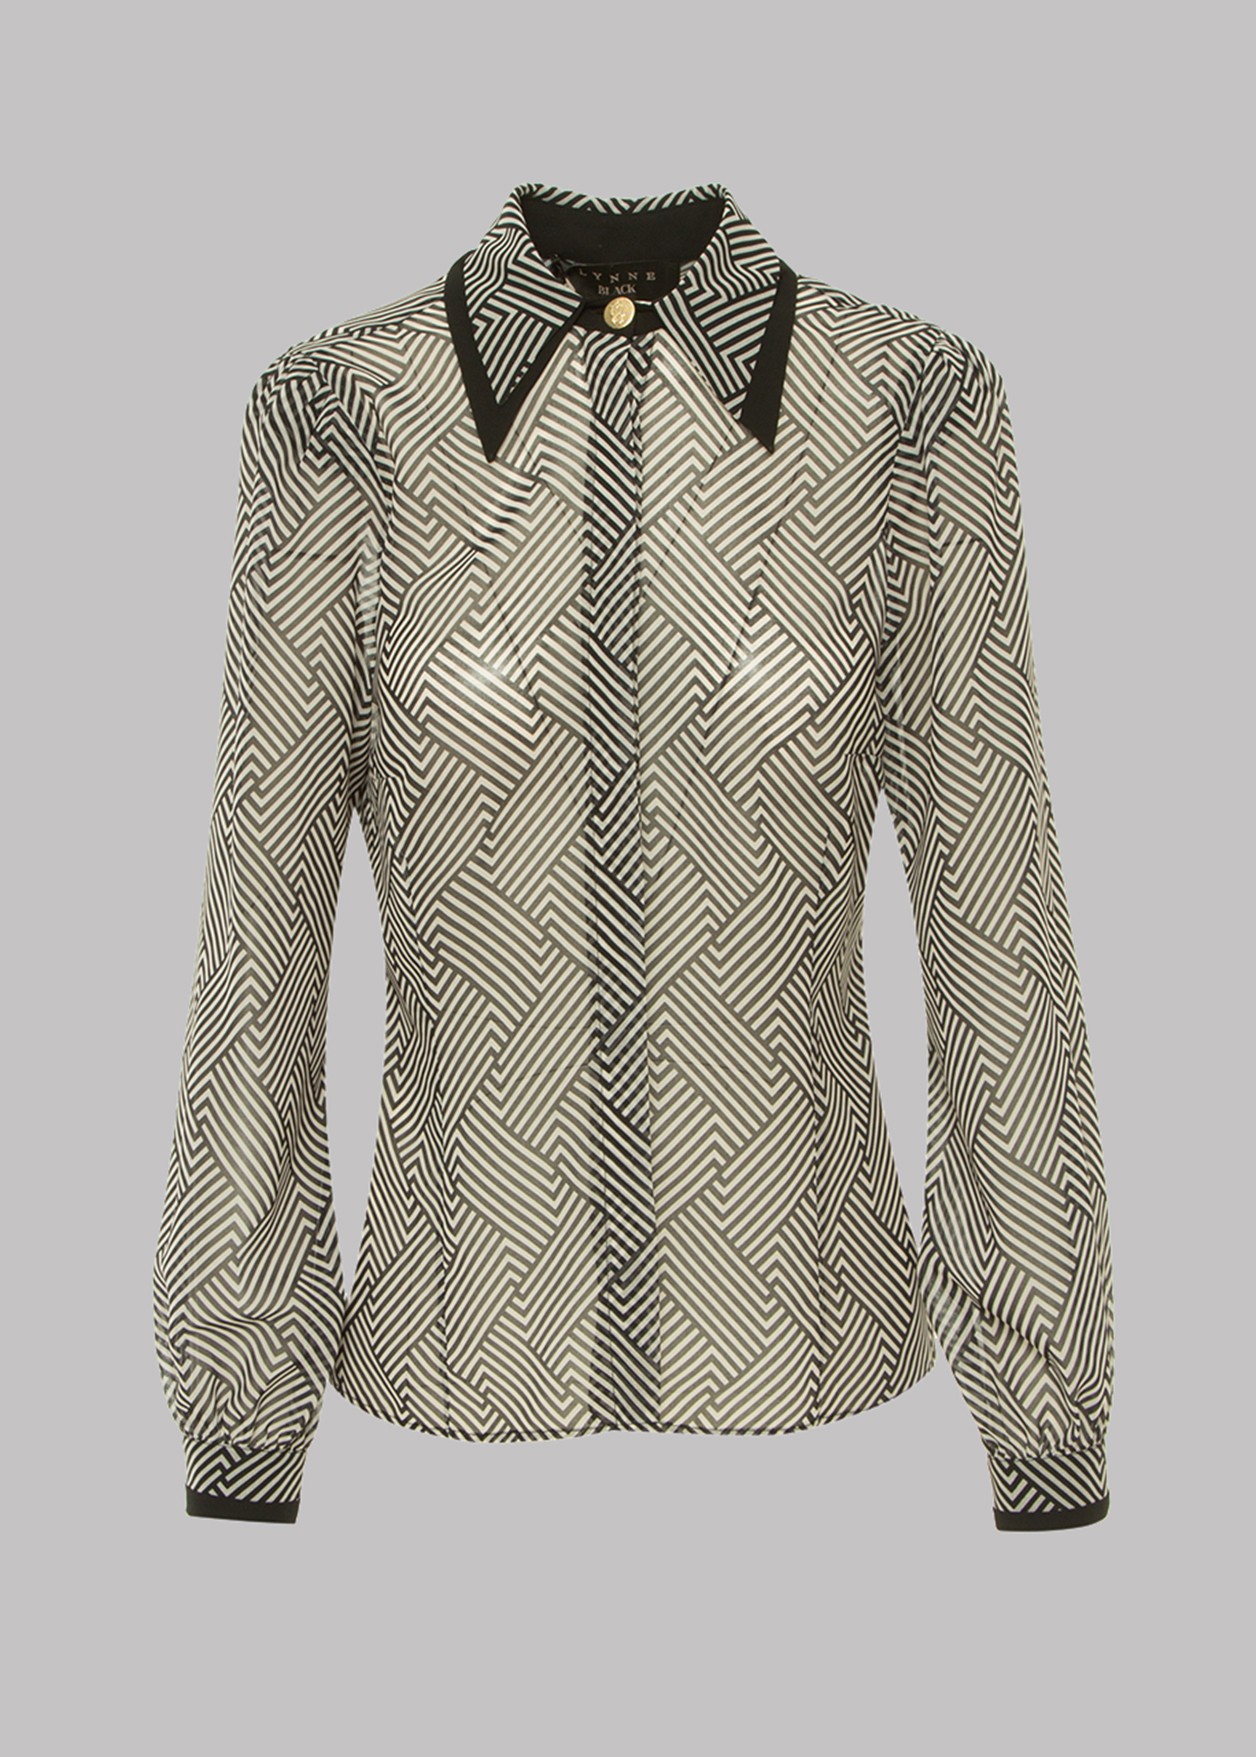 Shirt with double collar and gold buttons